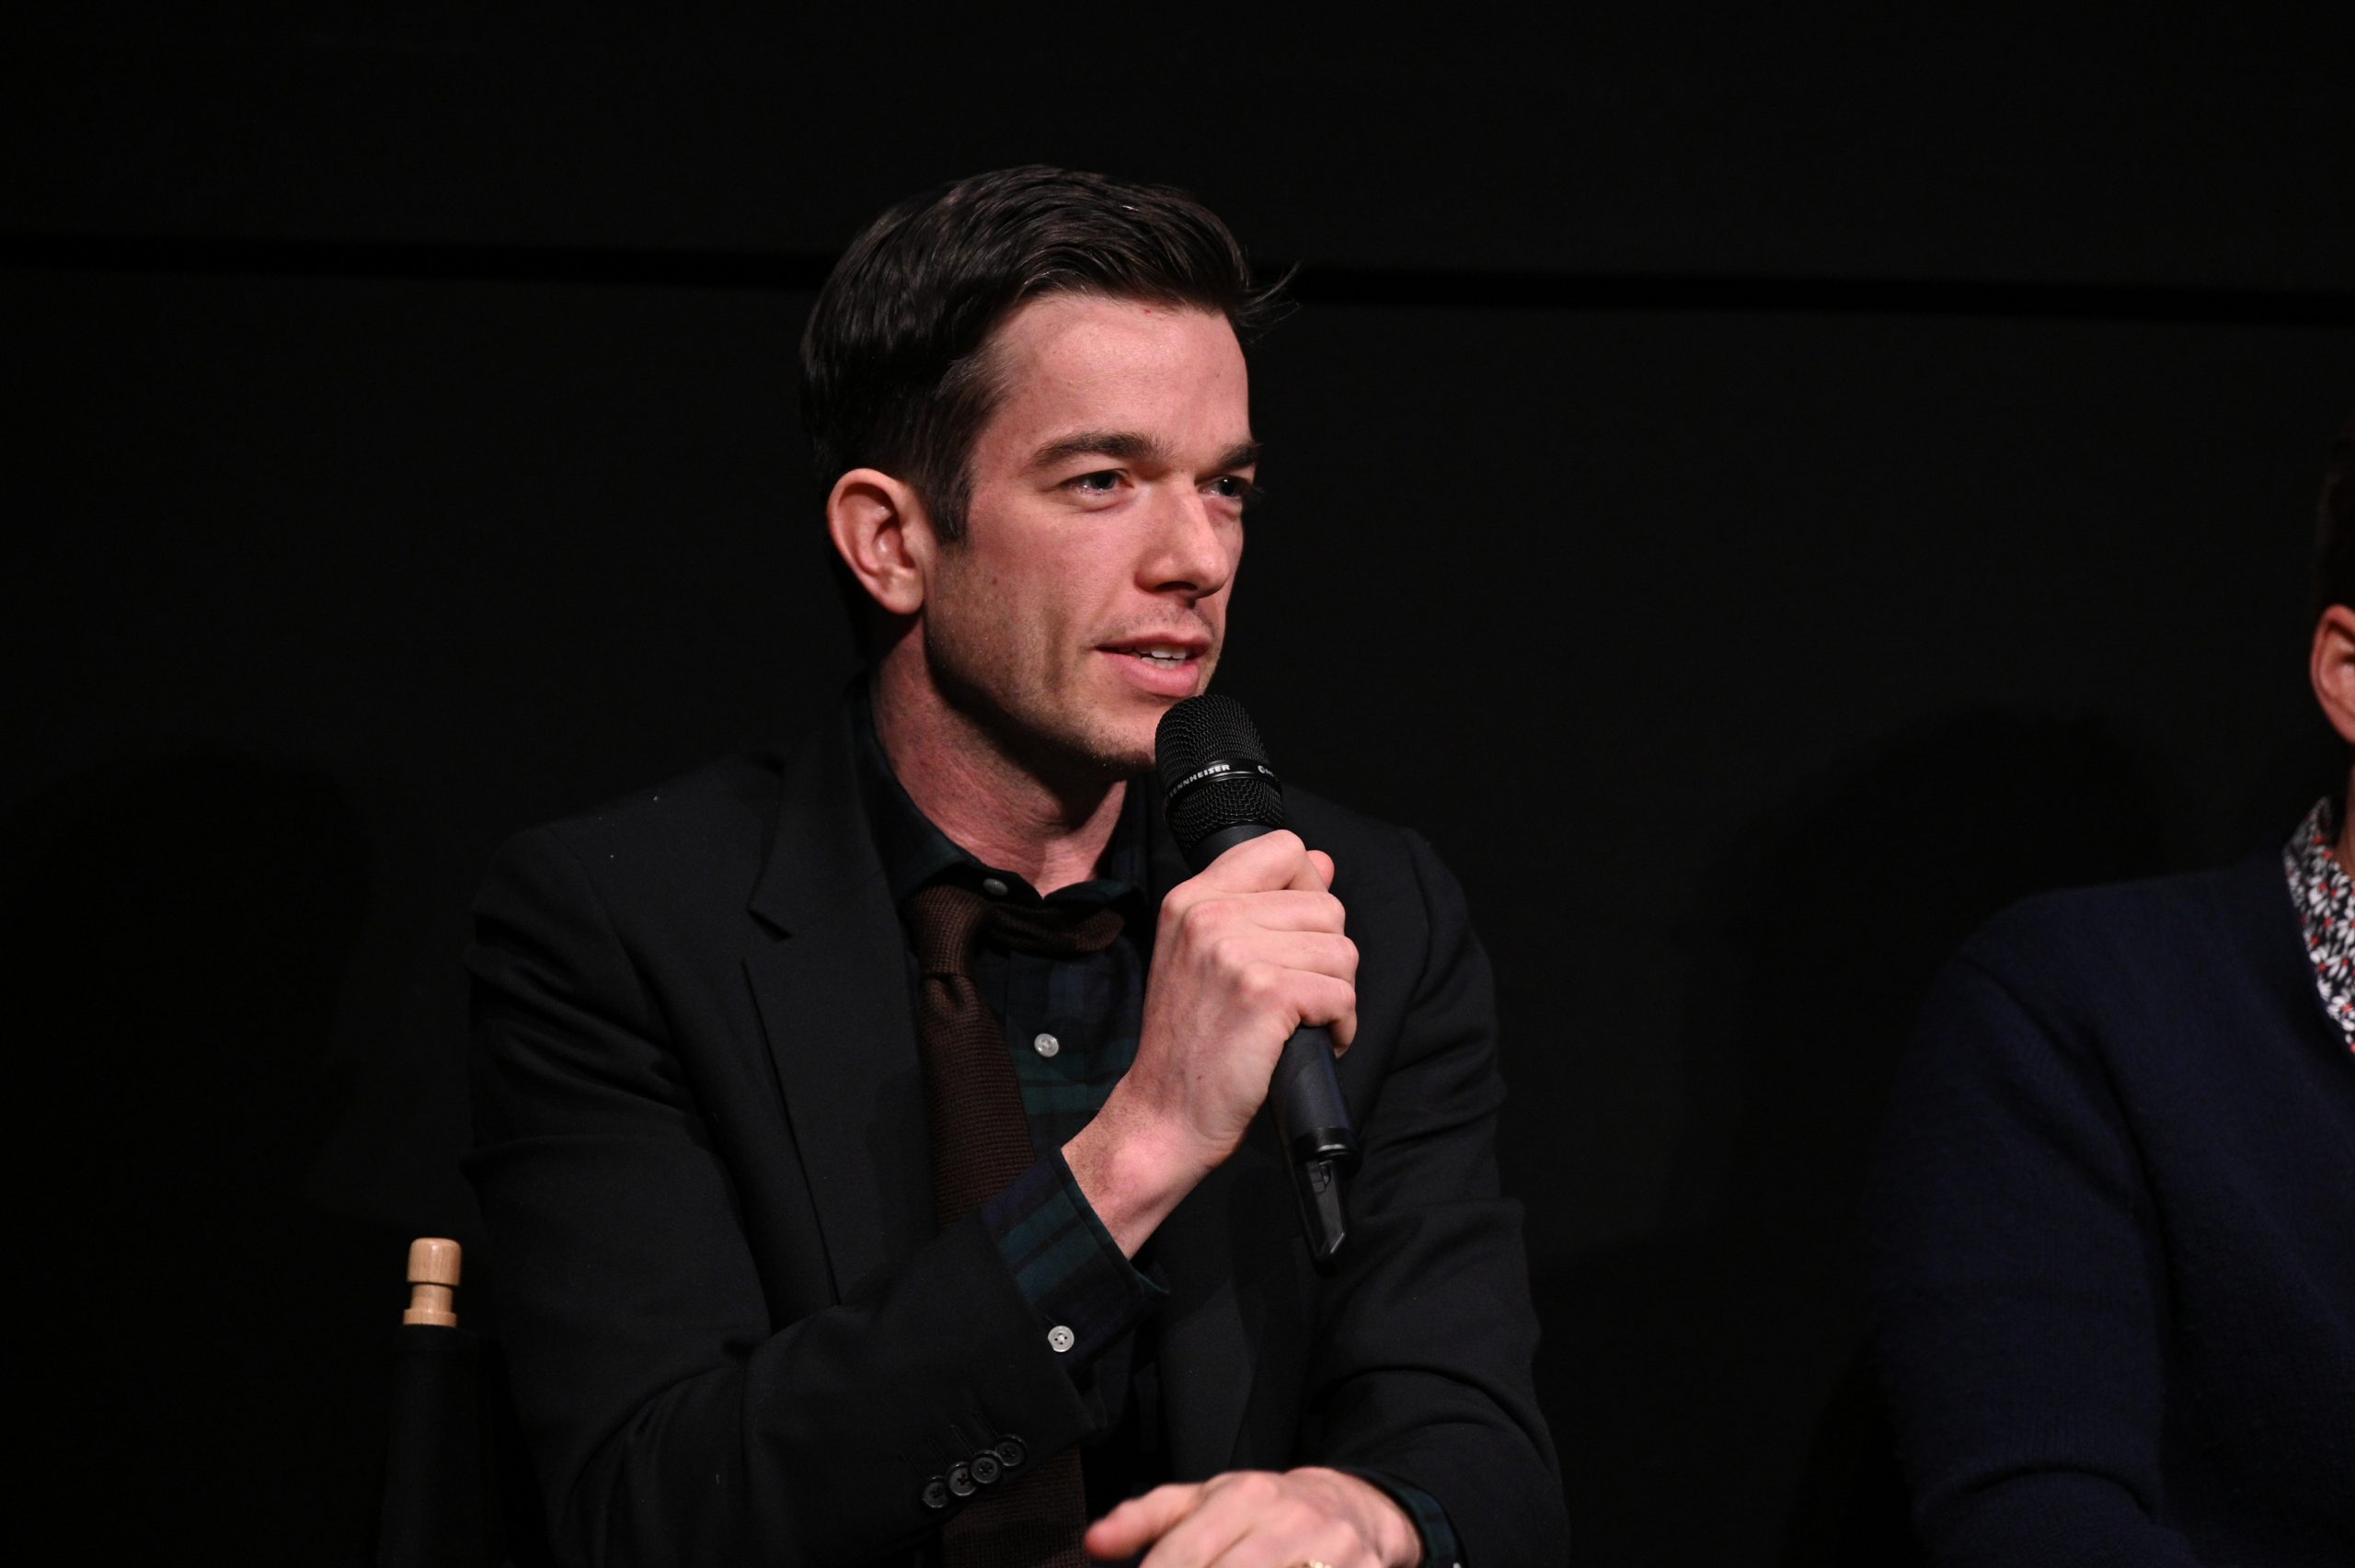 Comedian John Mulaney holds a microphone